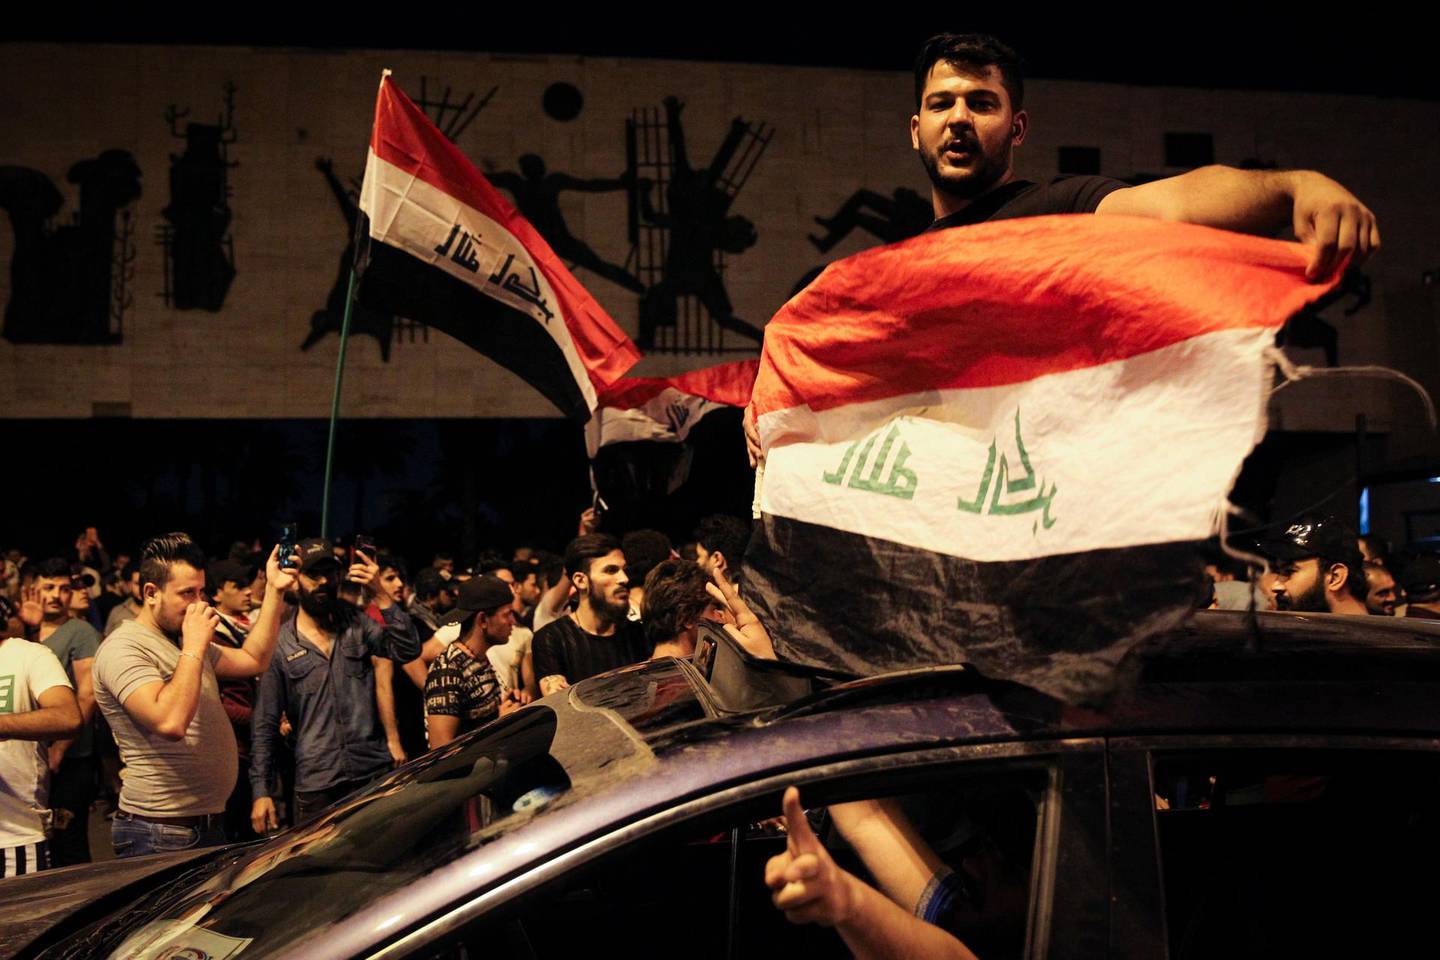 Iraqi protestors wave Iraq's national flags frome a car;s sun-roof as they take part in anti-government demonstrations in Baghdad's Tahrir Square on October 24, 2019. Anti-government rallies renewed across Iraq late on October 24, 2019, the second phase of protests denouncing corruption and unemployment before evolving into calls for an overhaul of the political system that turned deadly earlier this month and which could balloon after the endorsement of populist cleric Moqtada al-Sadr. / AFP / -
